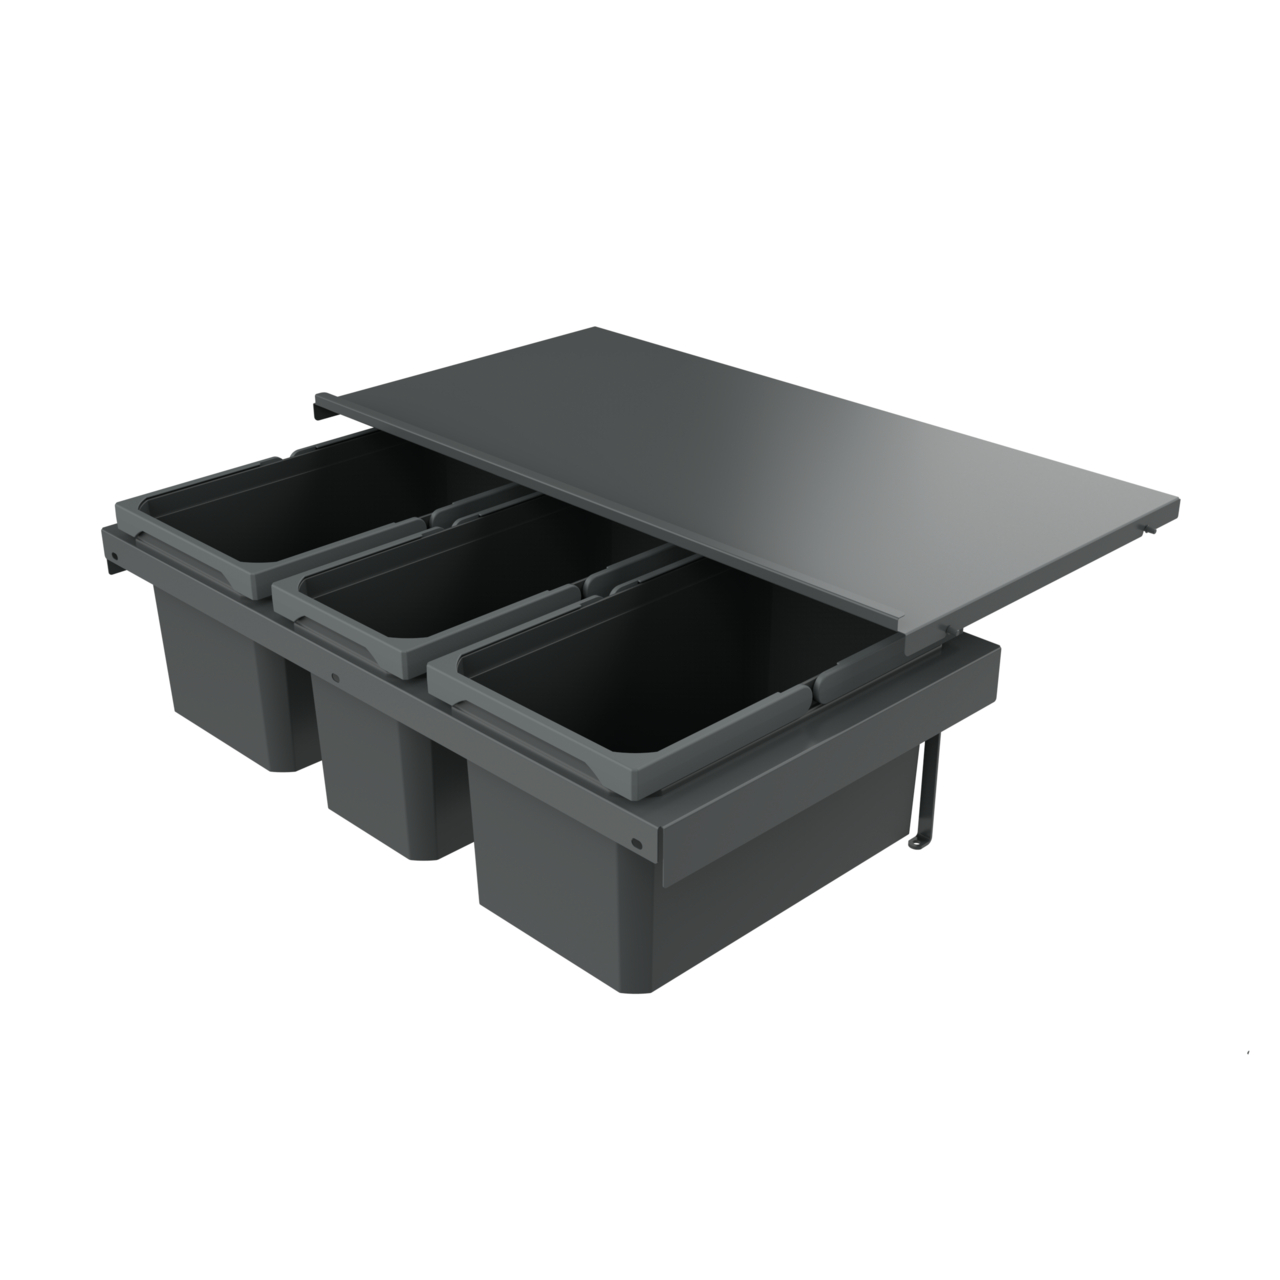  Cox Stand-UP® 250 S/800-3, anthracite, H 235 mm